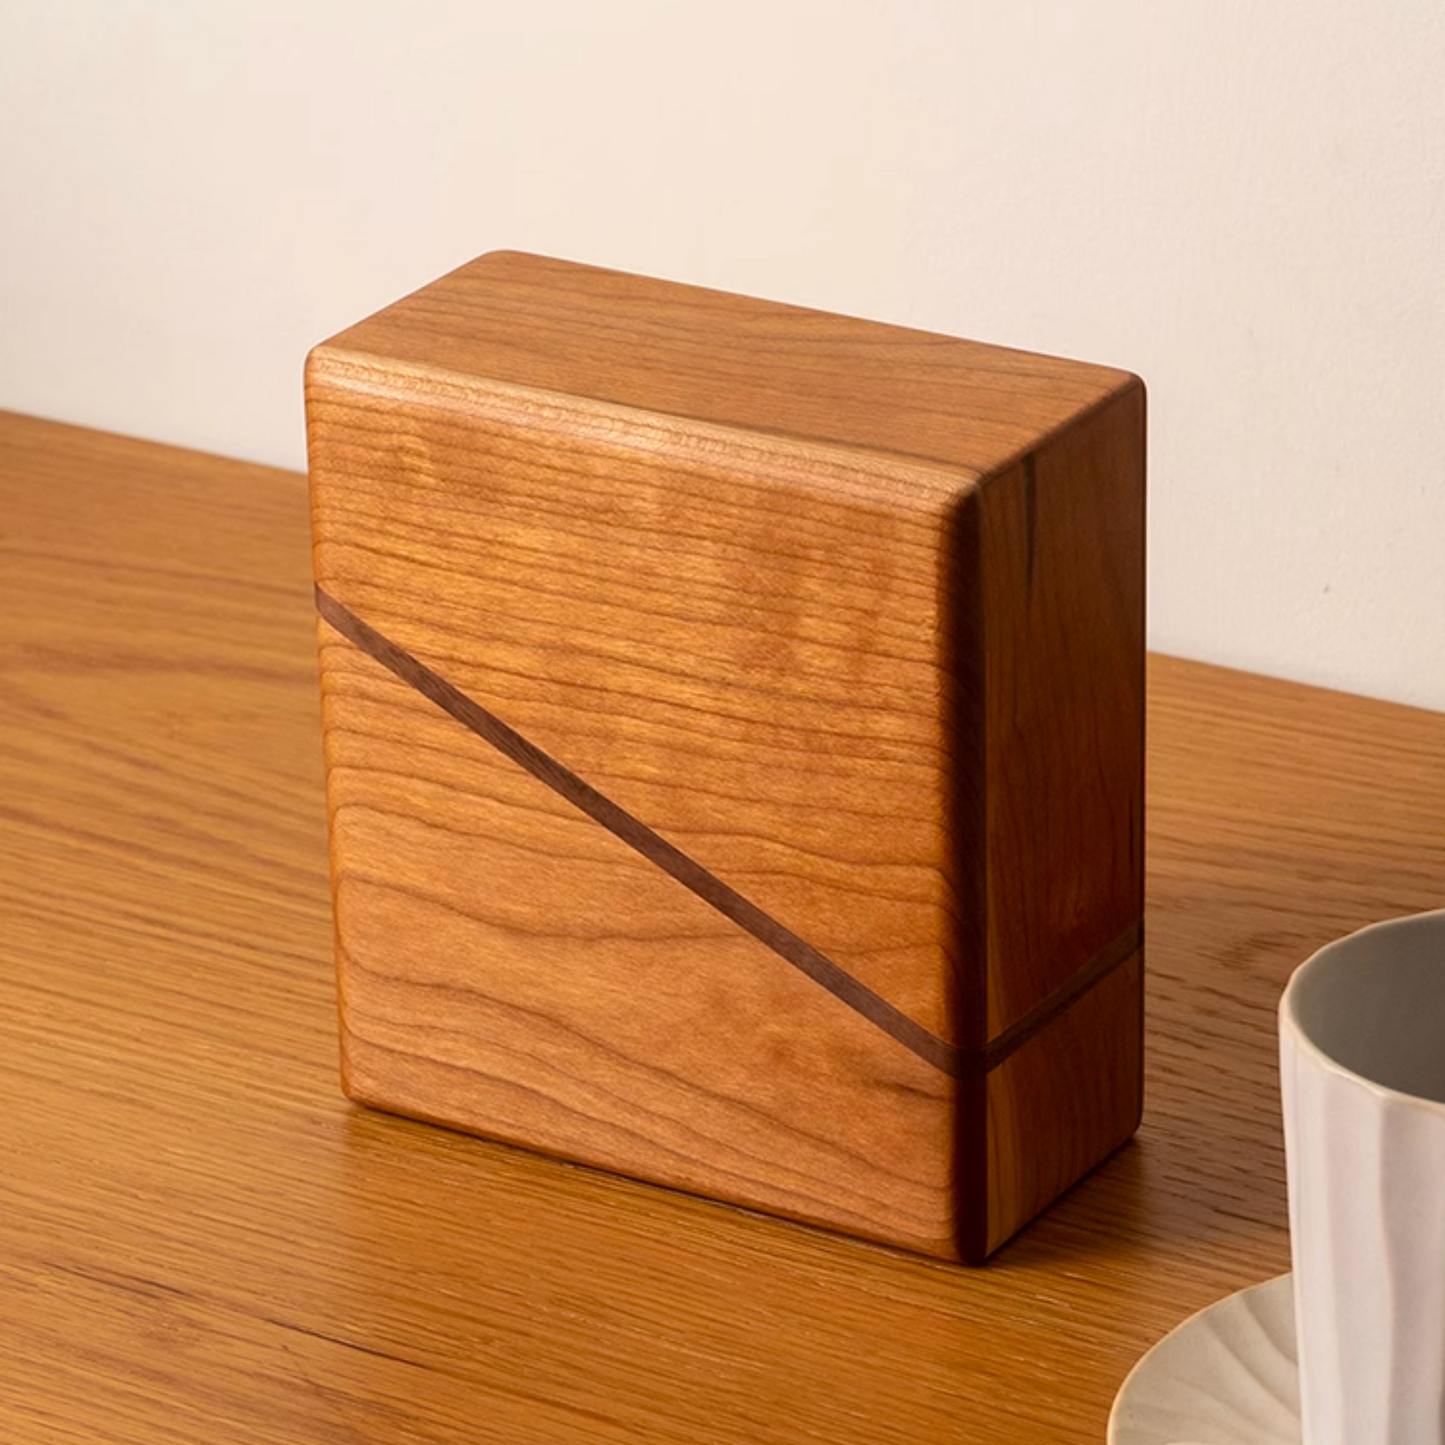 Wooden Coffee Filter Holder with Cover